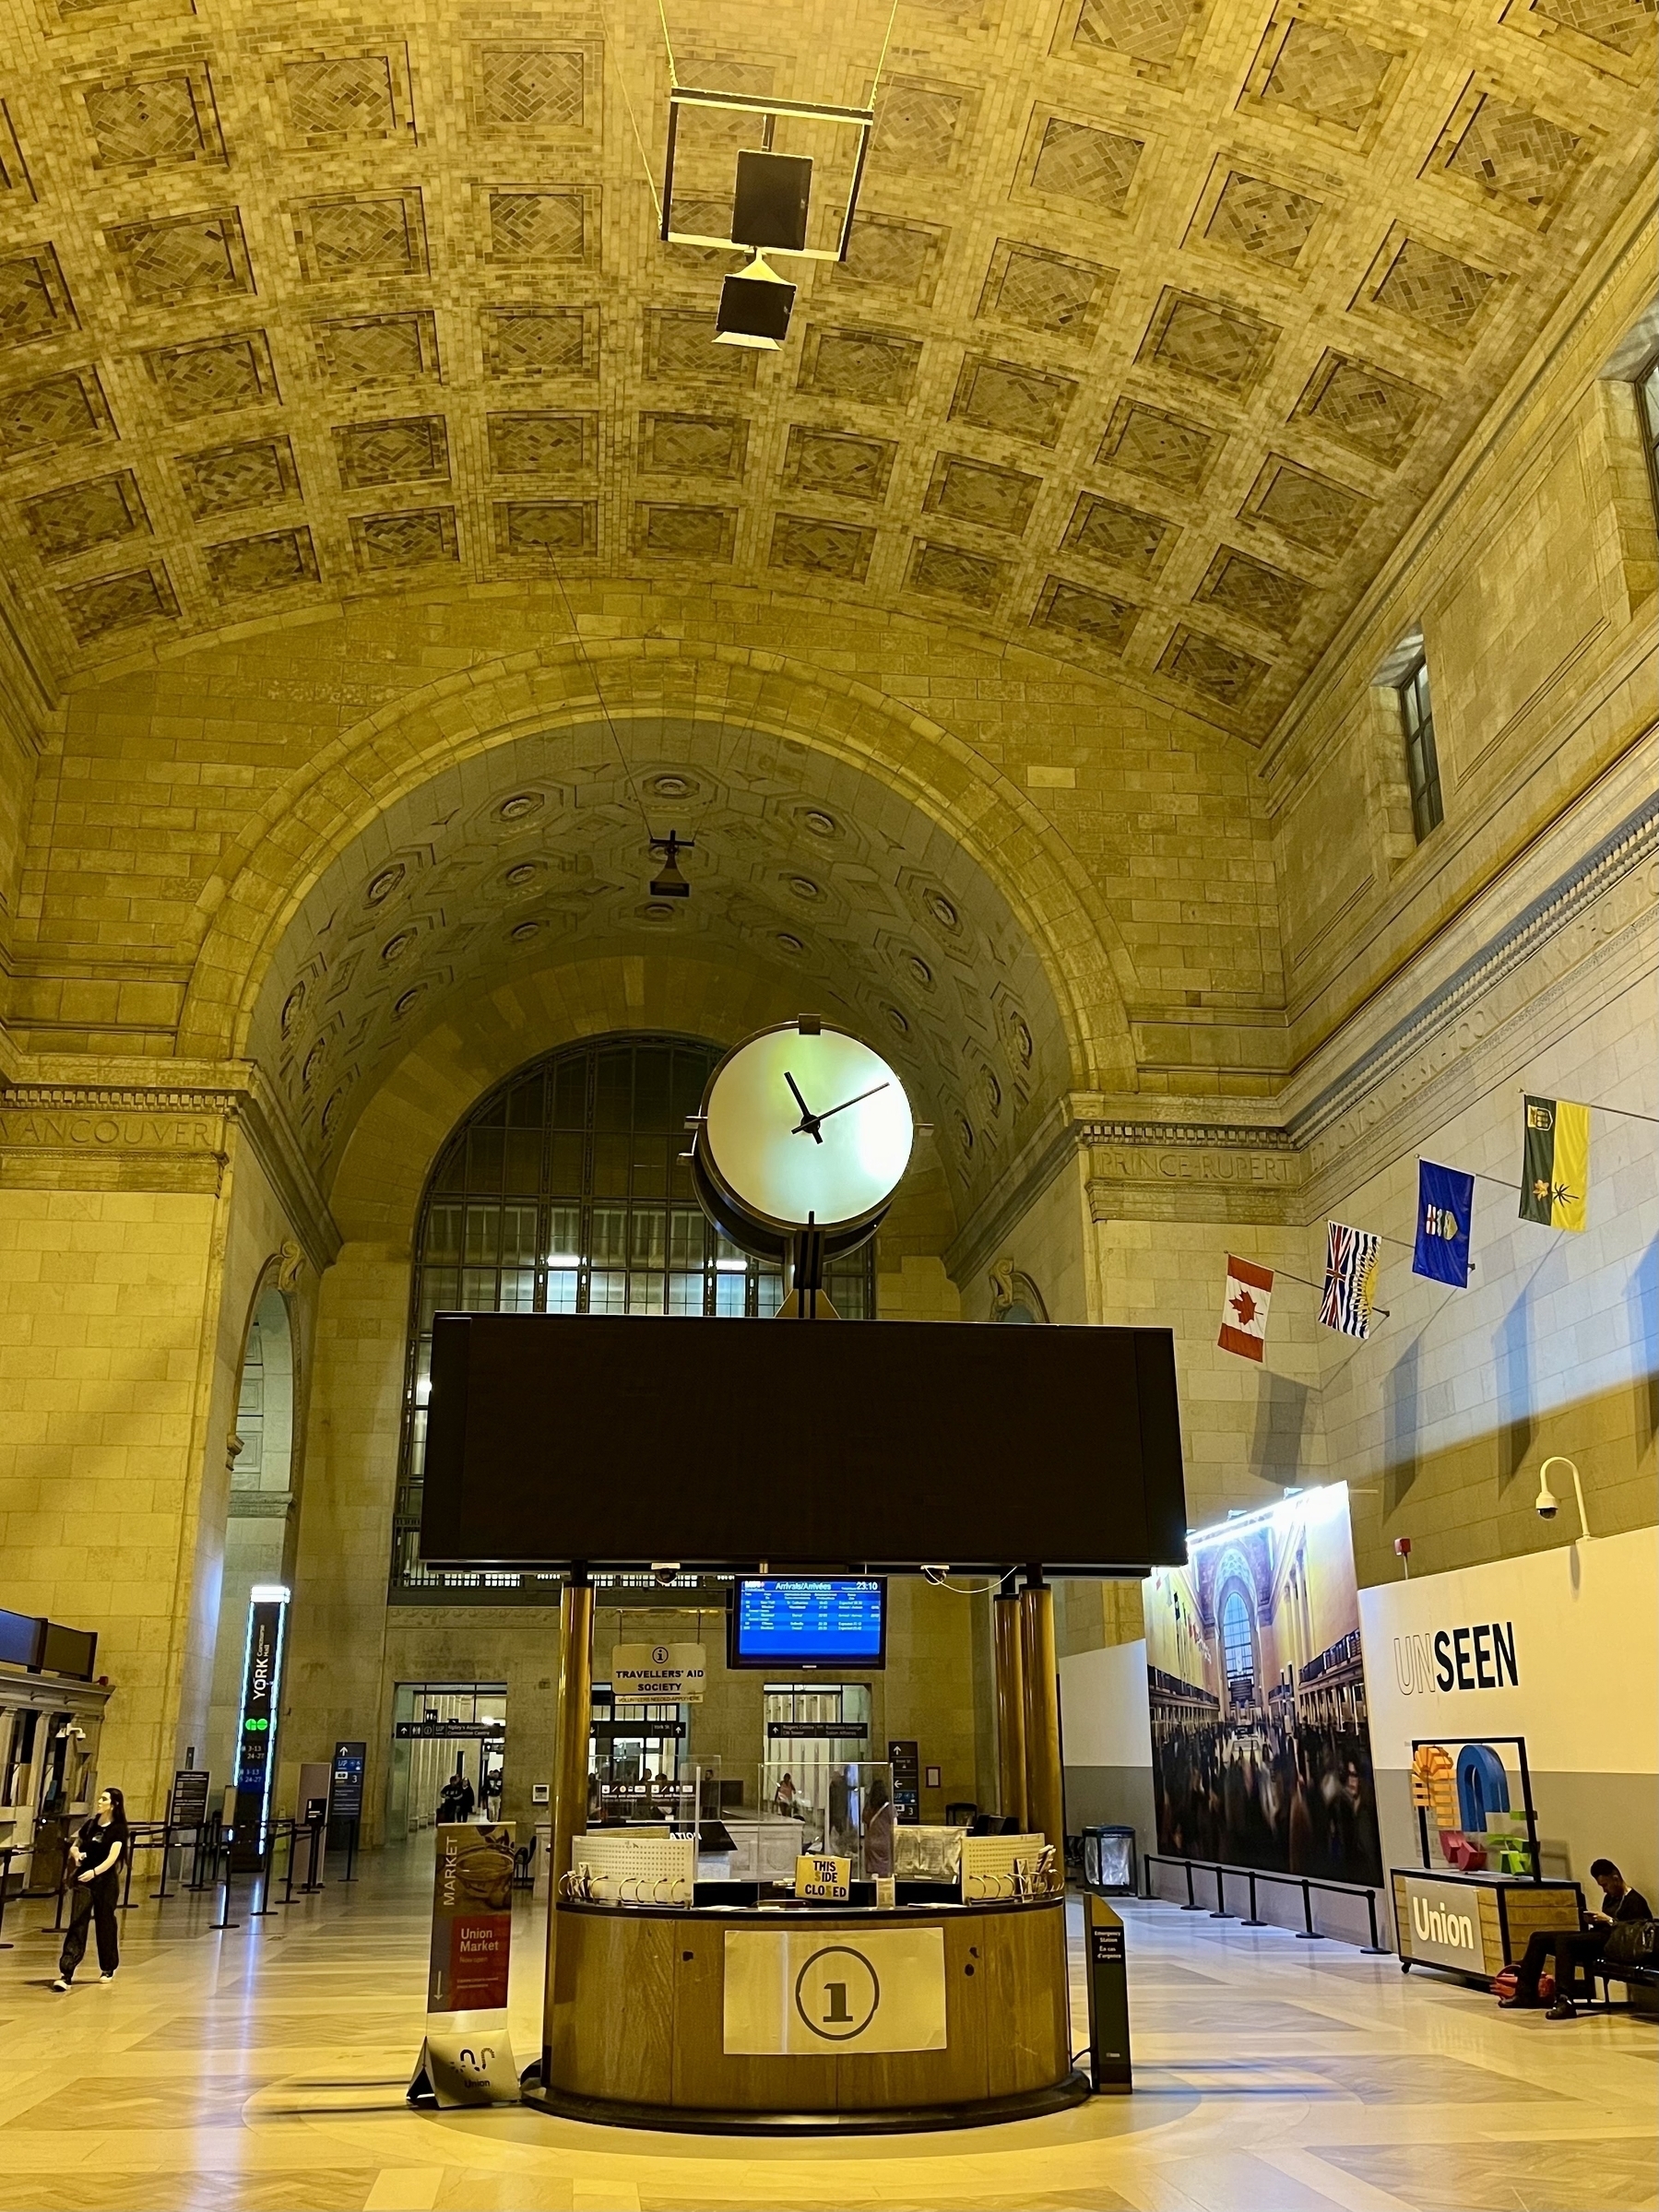 Large clock in the Great Hall at Toronto’s Union Station